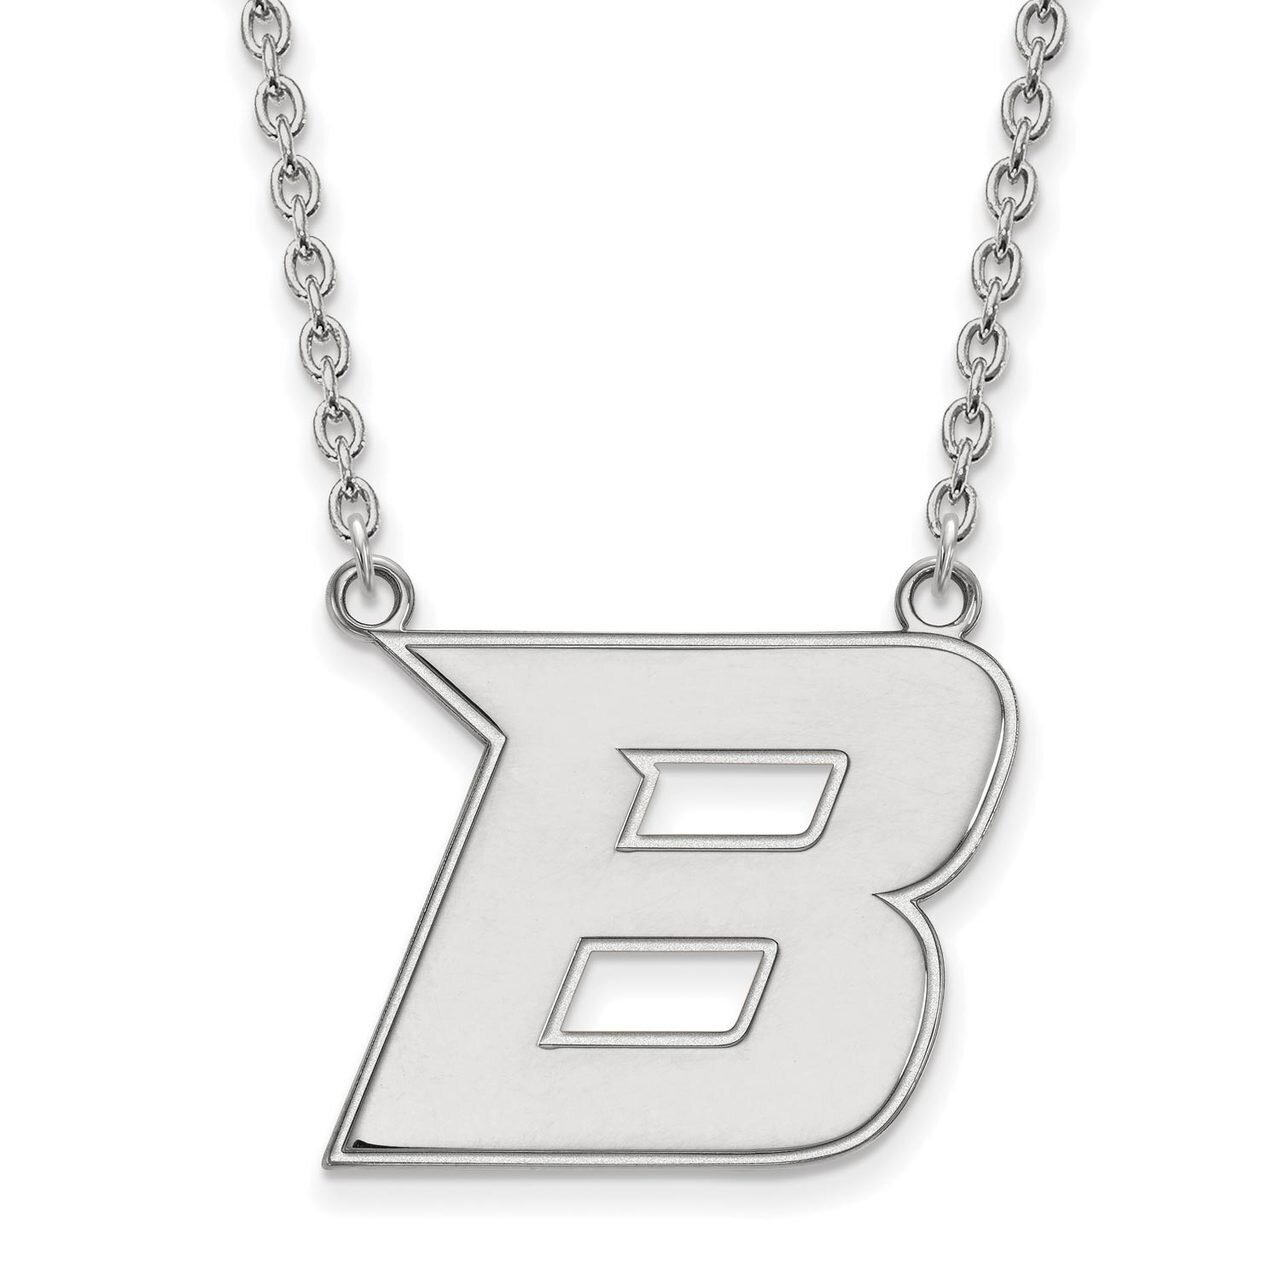 Boise State University Large Pendant with Chain Necklace Sterling Silver SS008BOS-18